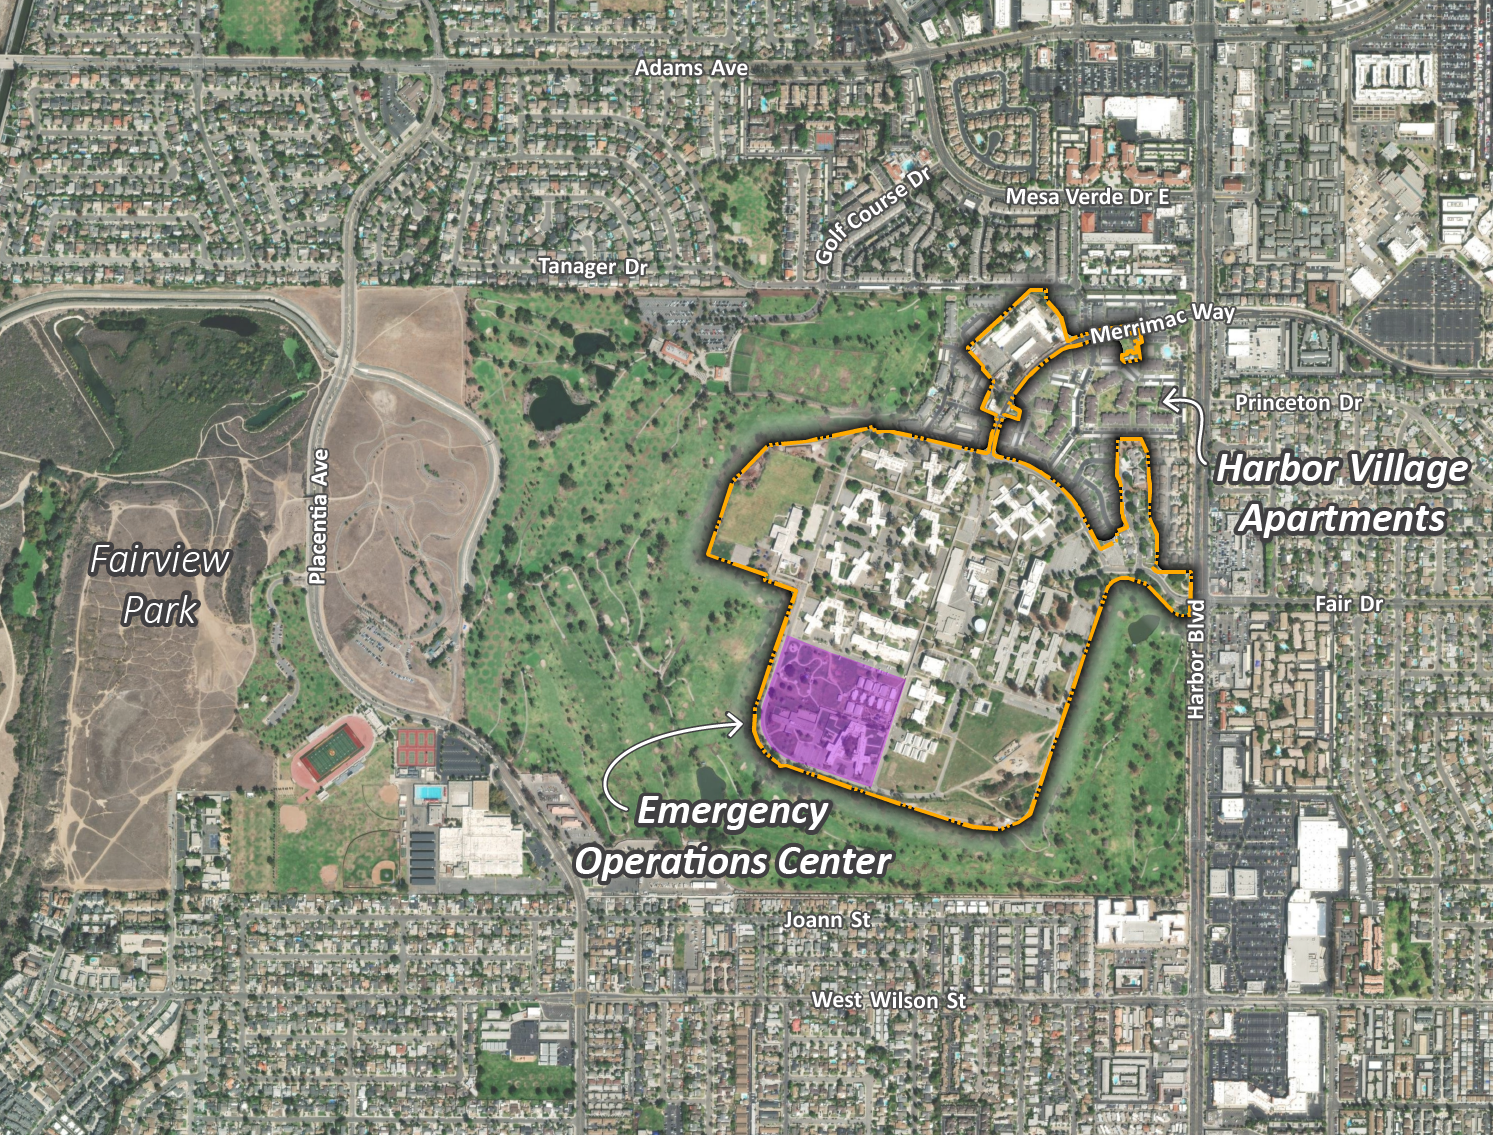 Satellite view showing the study area of the Developmental Center as it sits in the nearby neighborhoods. An orange dotted line shows the outline of the whole site, with a purple overlay in the southwest corner for the Emergency Operations Center, which is not part of this project.